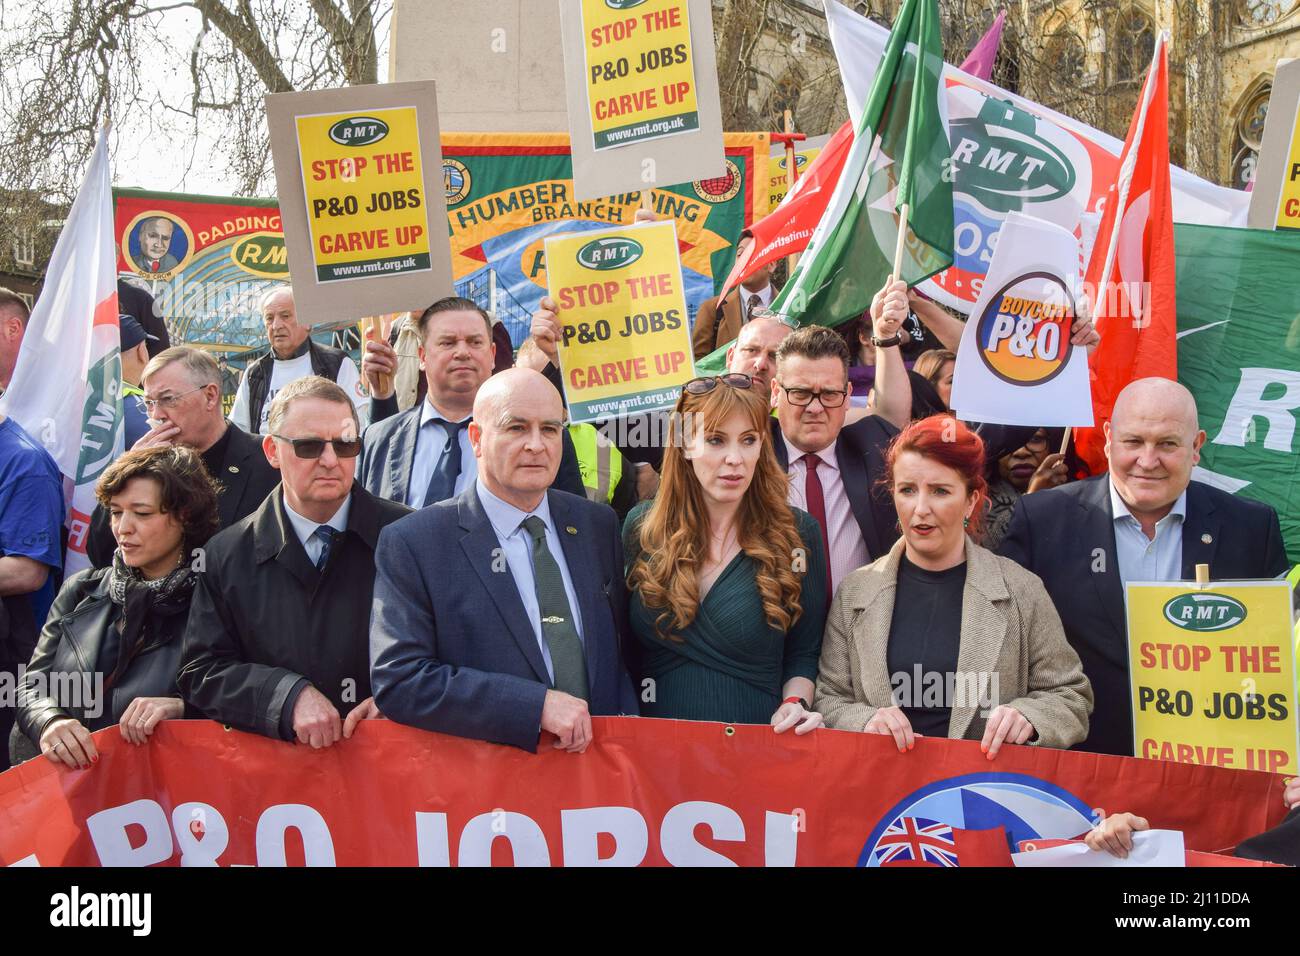 London, UK. 21st March 2022. Labour deputy leader ANGELA RAYNER, Shadow Secretary of State for Transport and Labour MP LOUISE HAIGH and secretary general of RMT Mick Lynch join the protesters outside Parliament. P&O Ferries staff and RMT Union members marched from the headquarters of DP World, the company which owns P&O, to Parliament, after 800 UK staff were fired and replaced by agency workers. Credit: Vuk Valcic/Alamy Live News Stock Photo